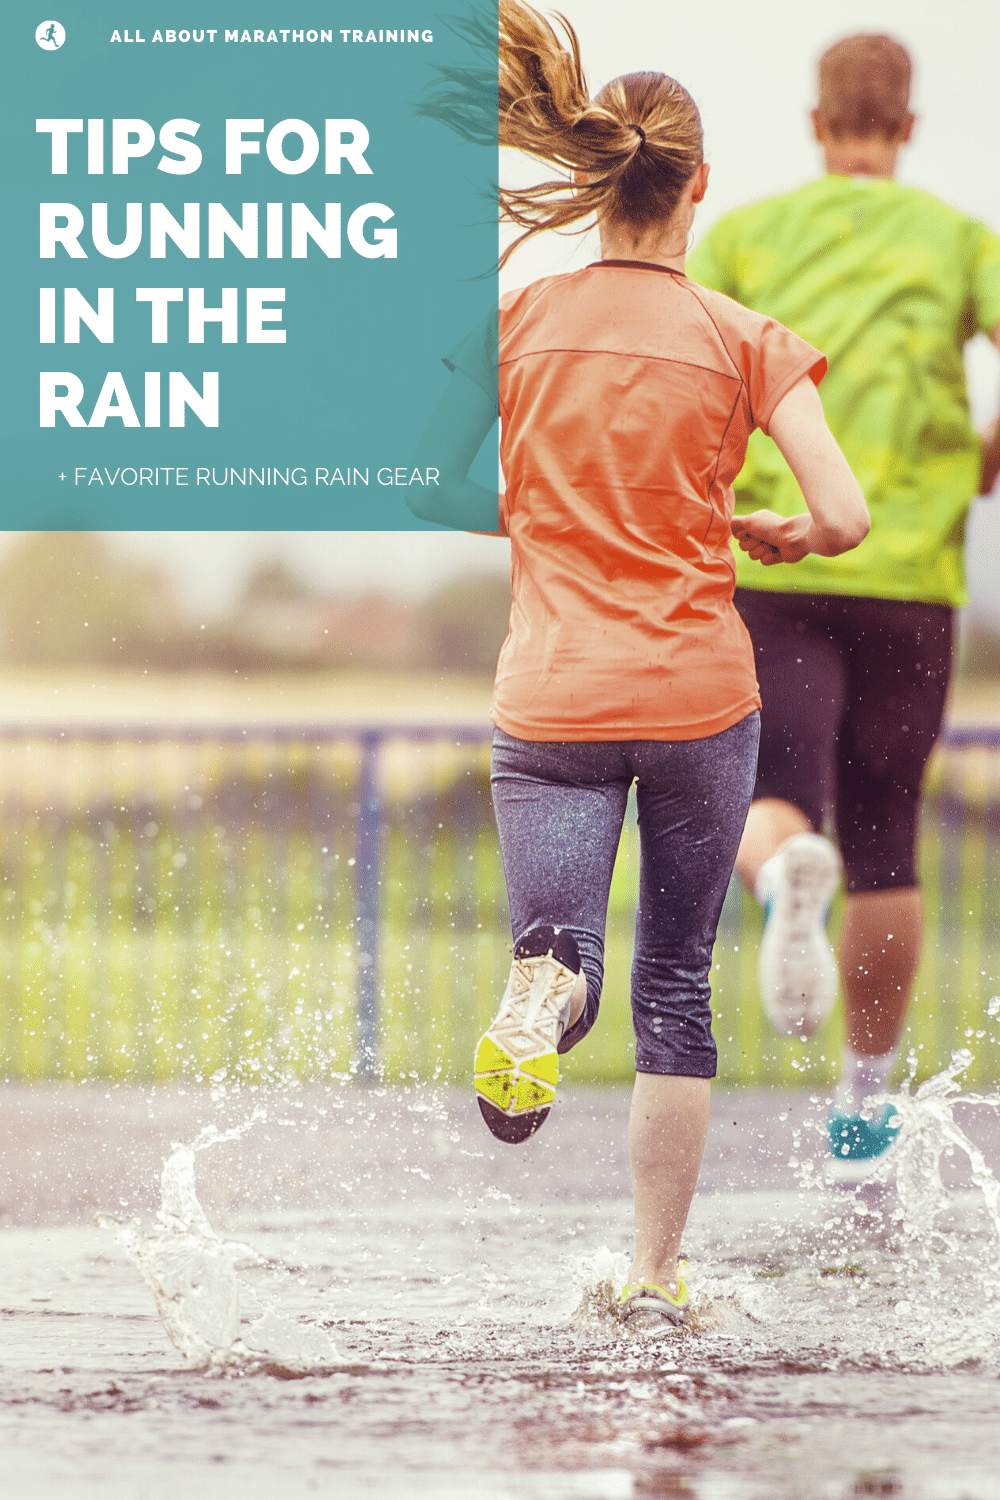 Get the Most Out of Running in the Rain